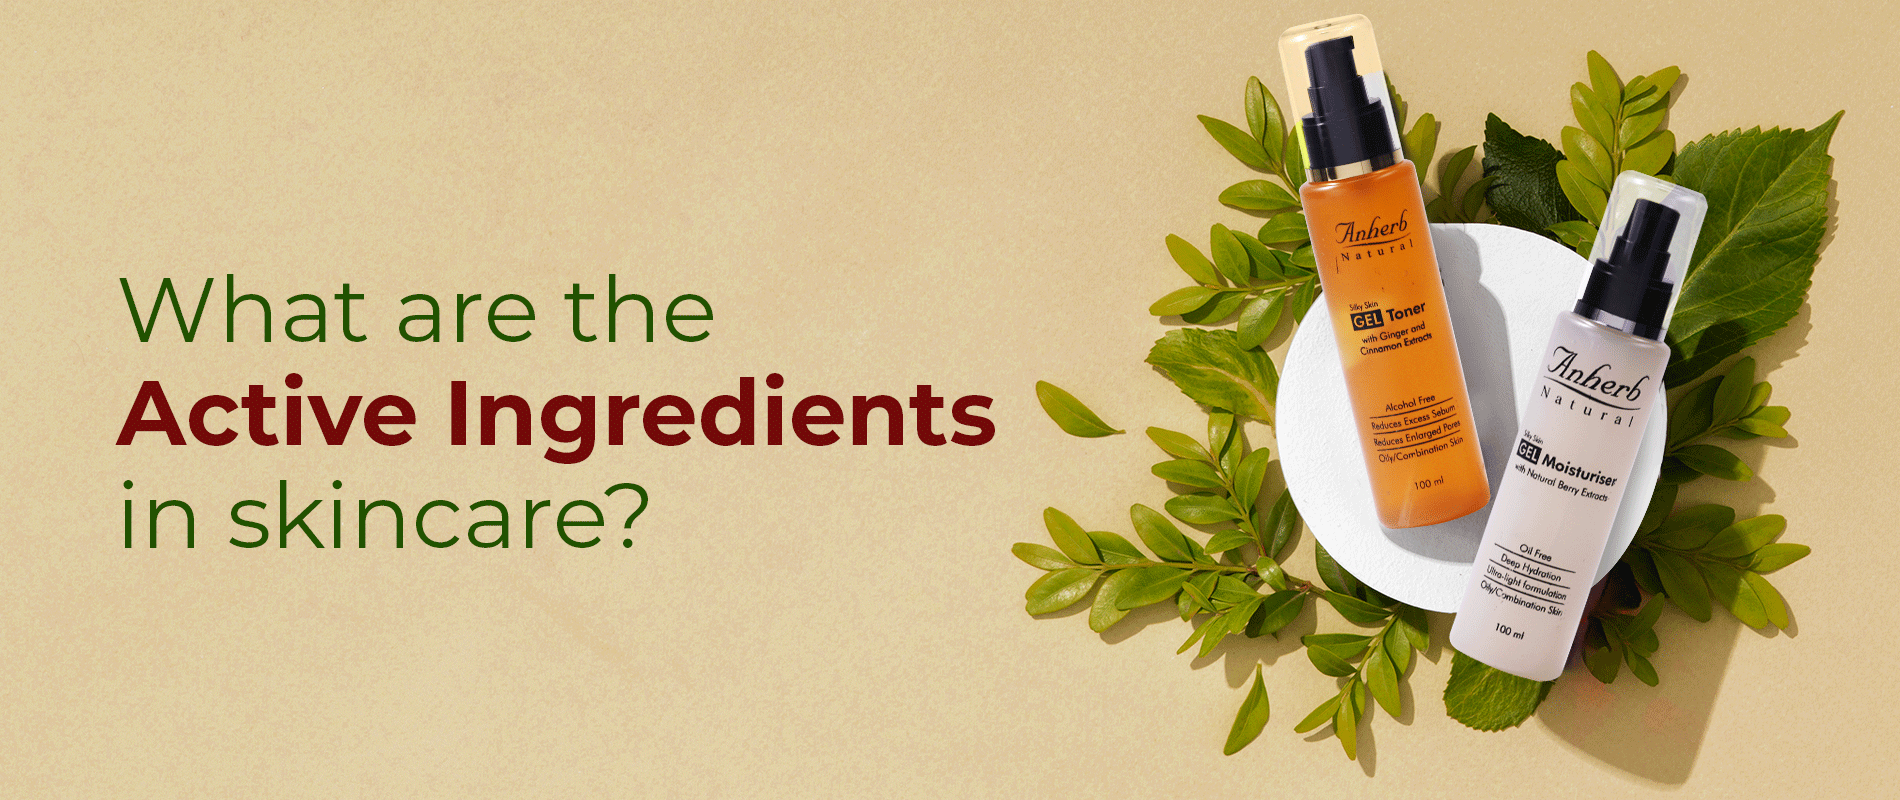 What are the natural active ingredients in skincare?